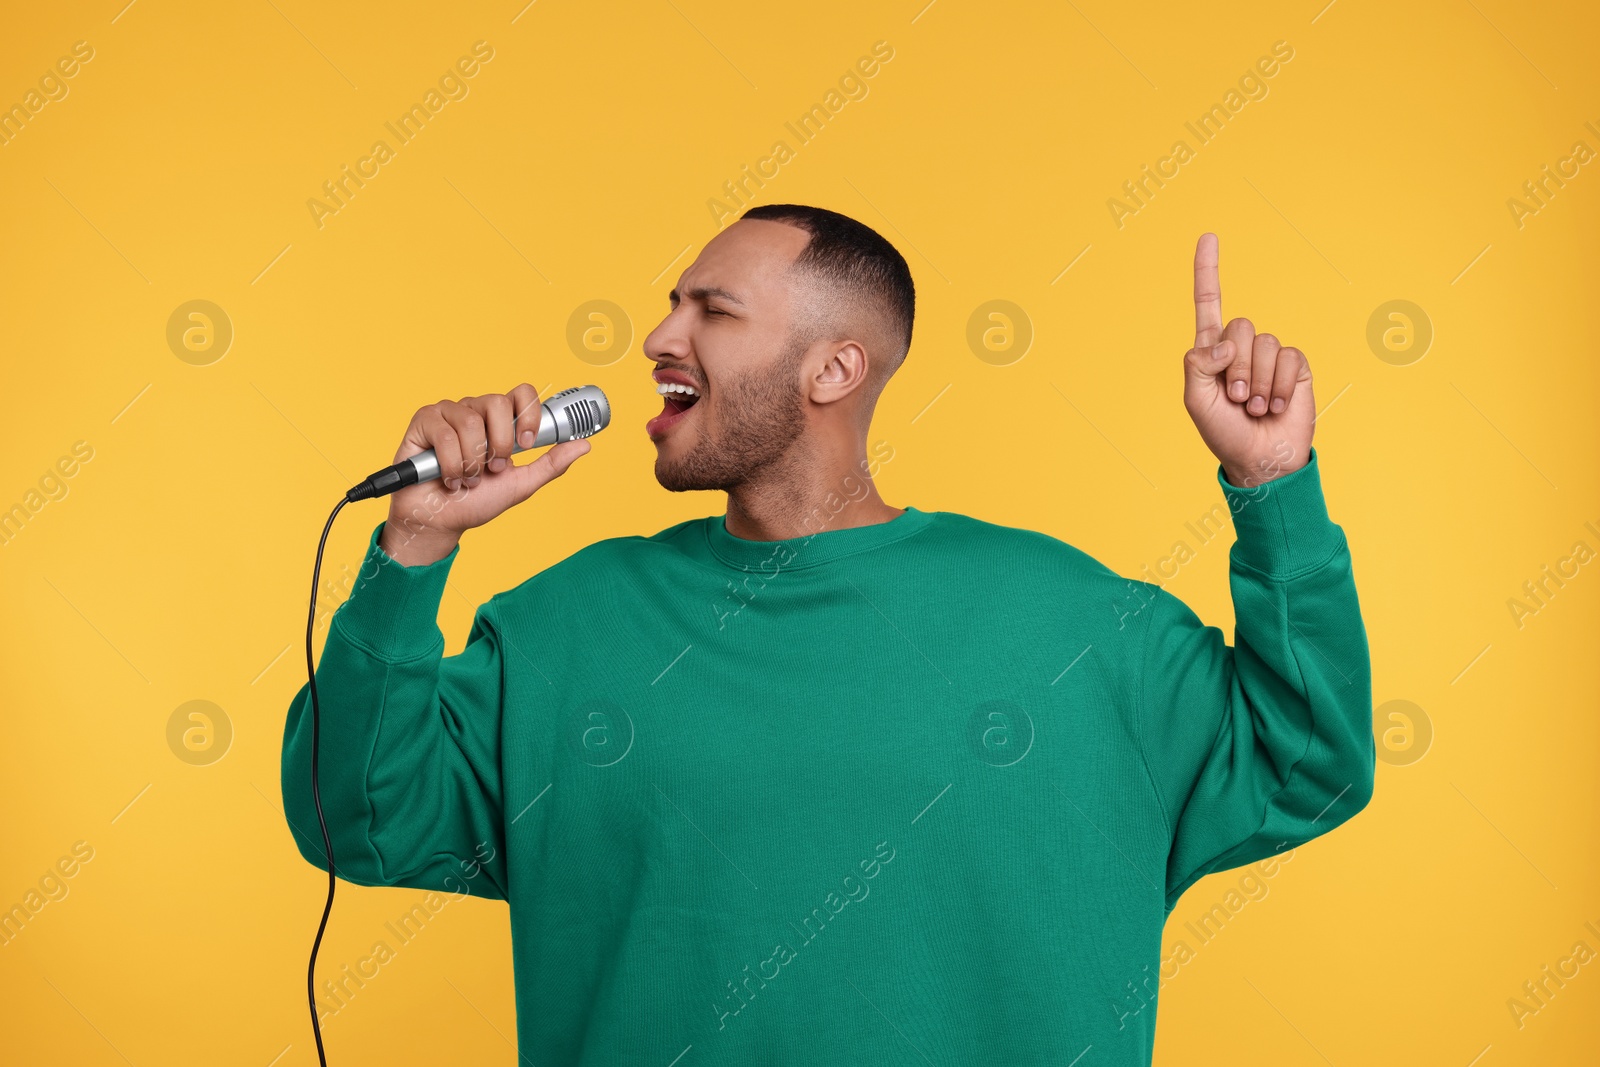 Photo of Handsome man with microphone singing on orange background